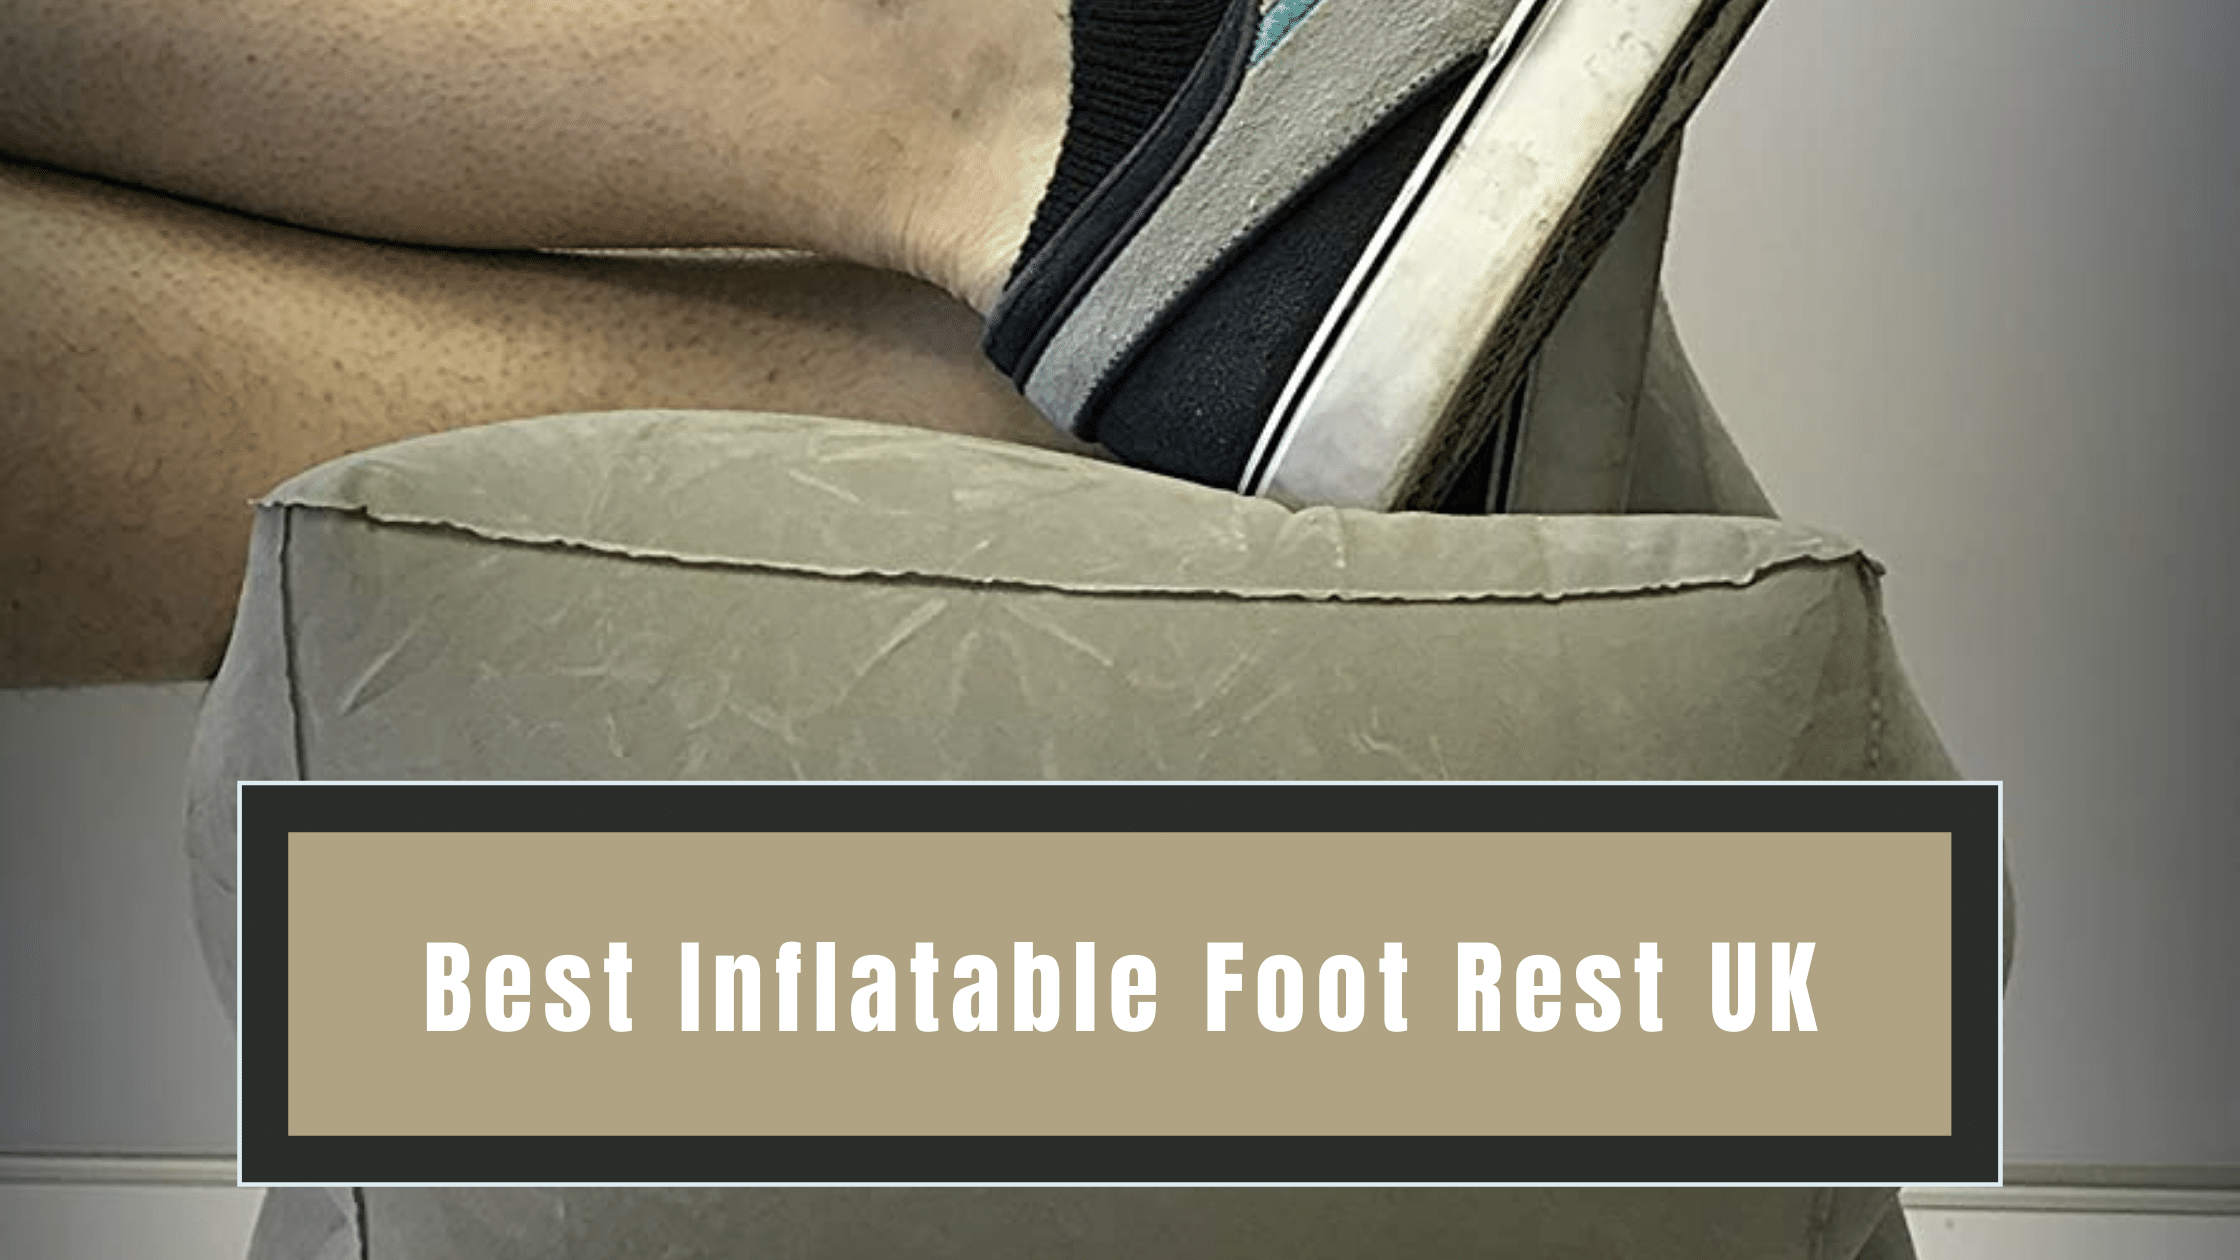 Best Inflatable Foot Rest UK